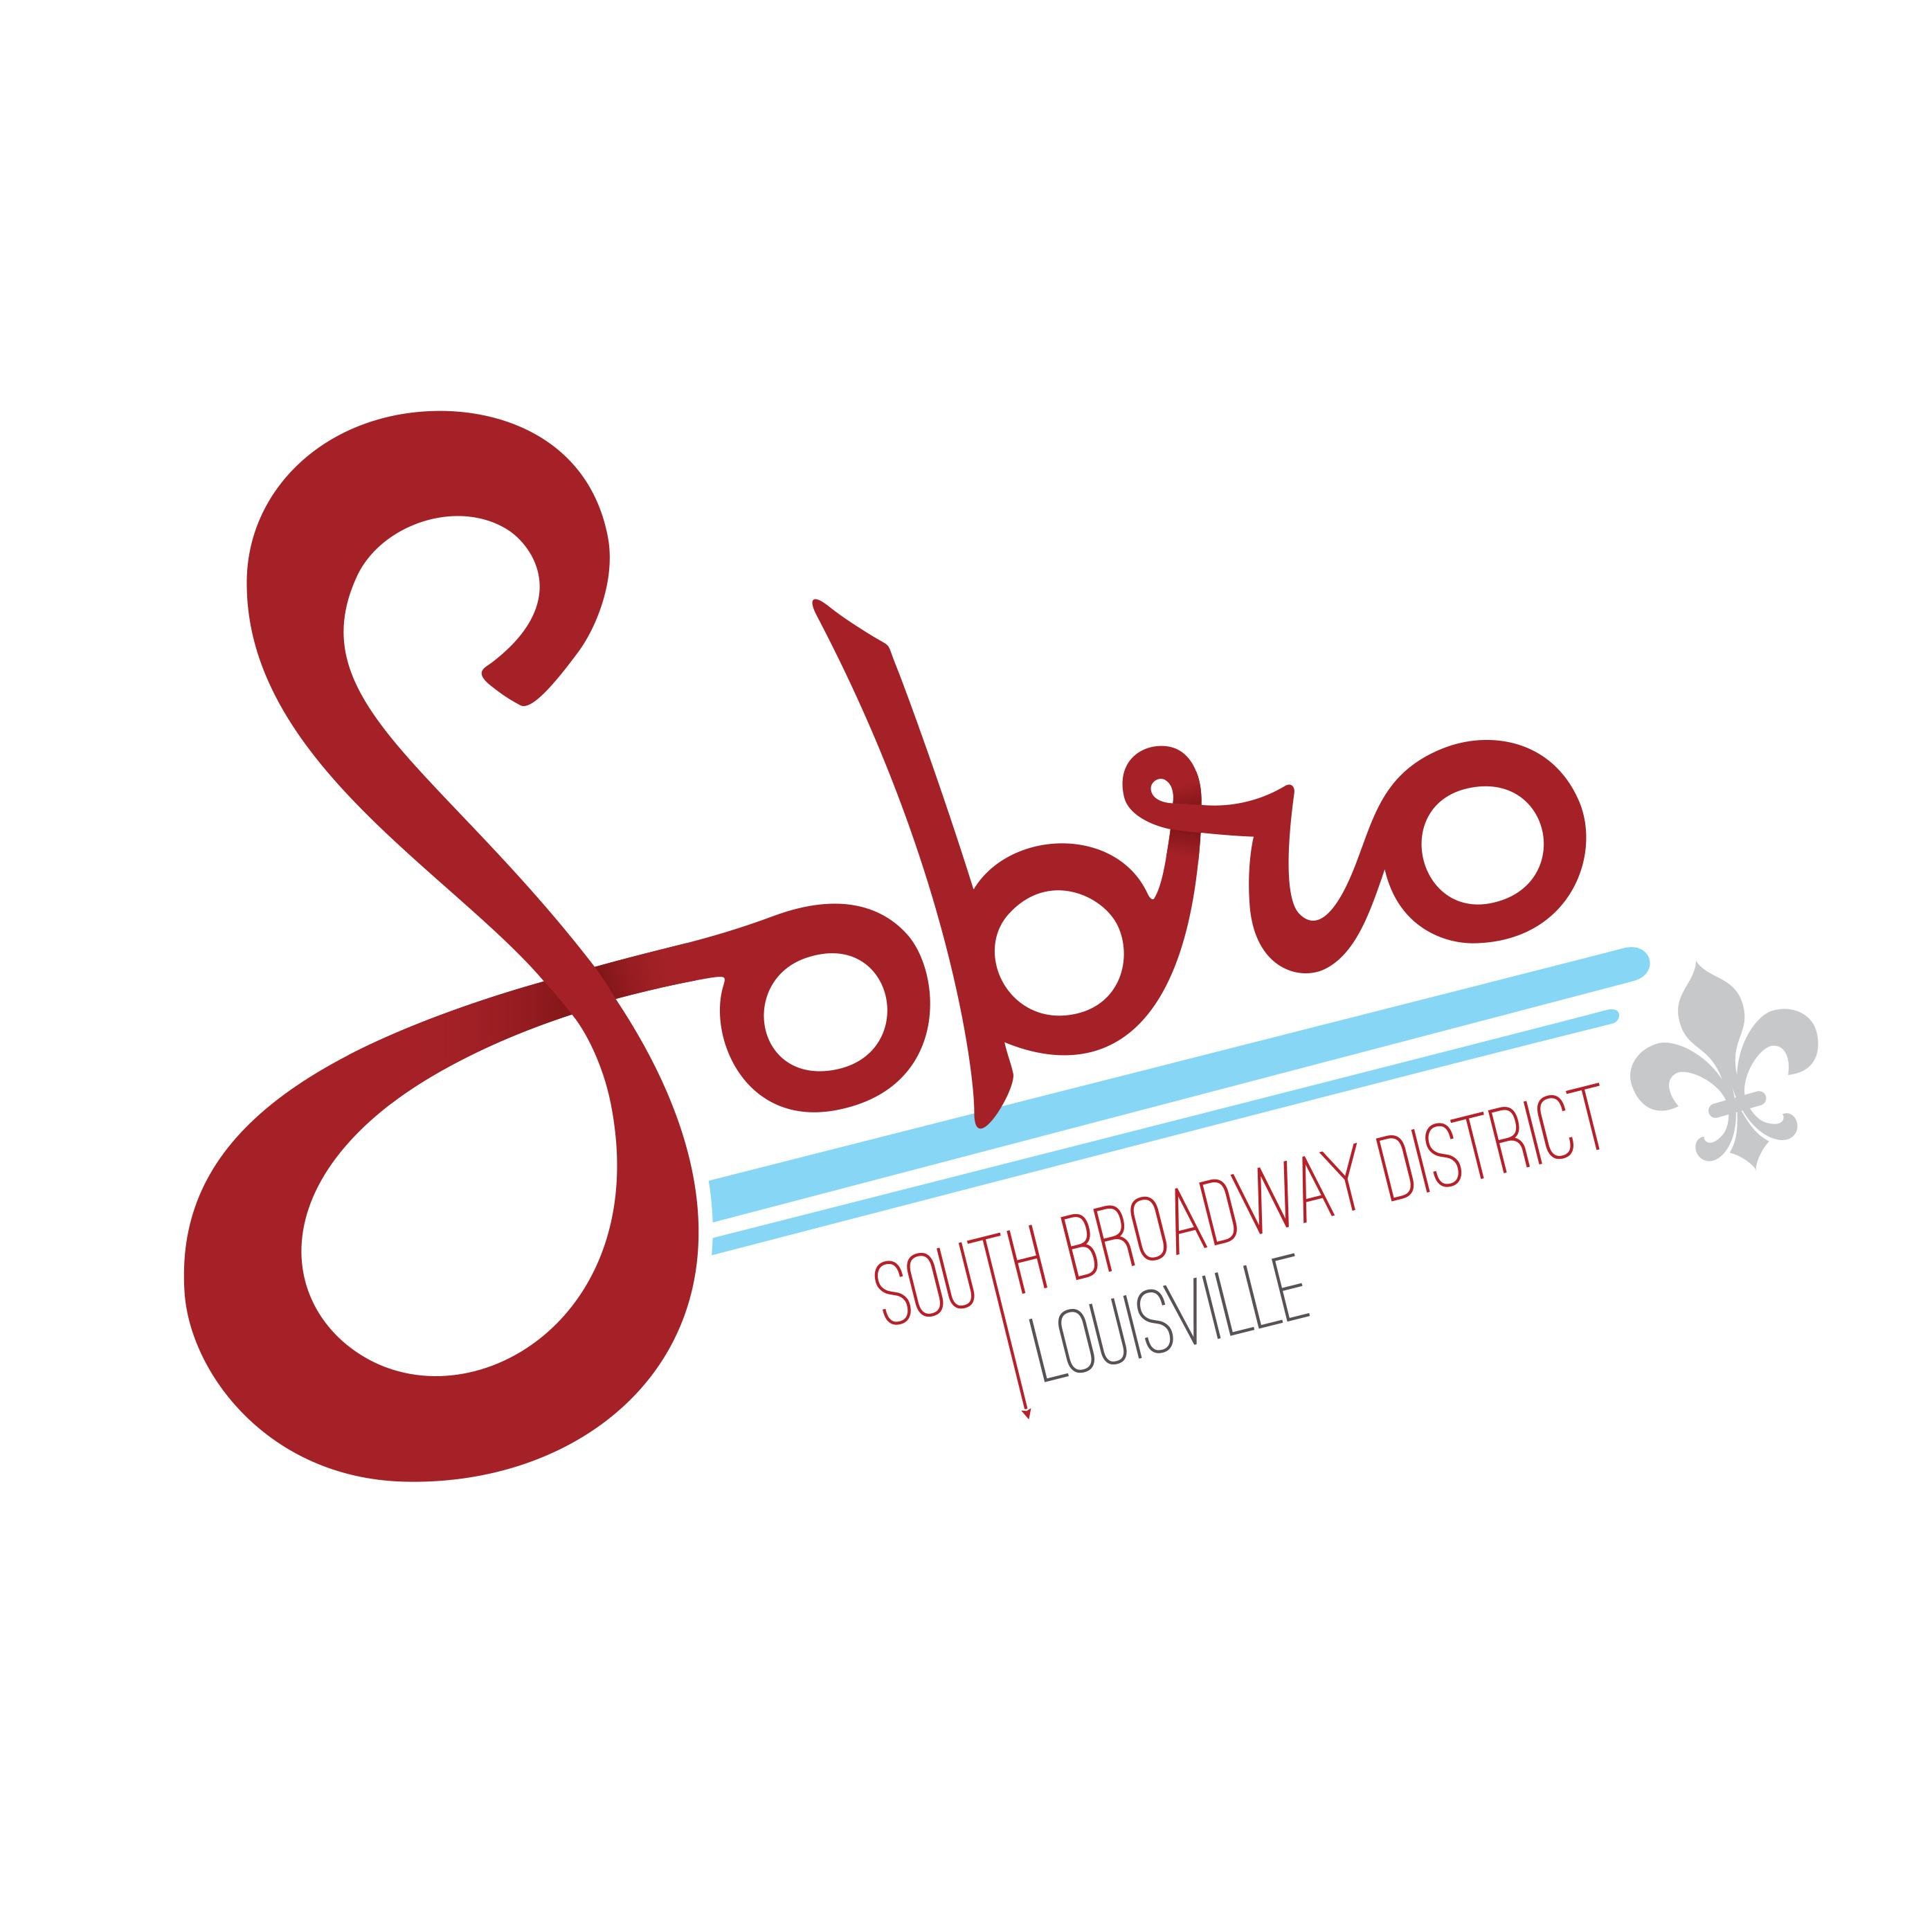 Promoting the academic, arts, culture and business community of SoBro Louisville.